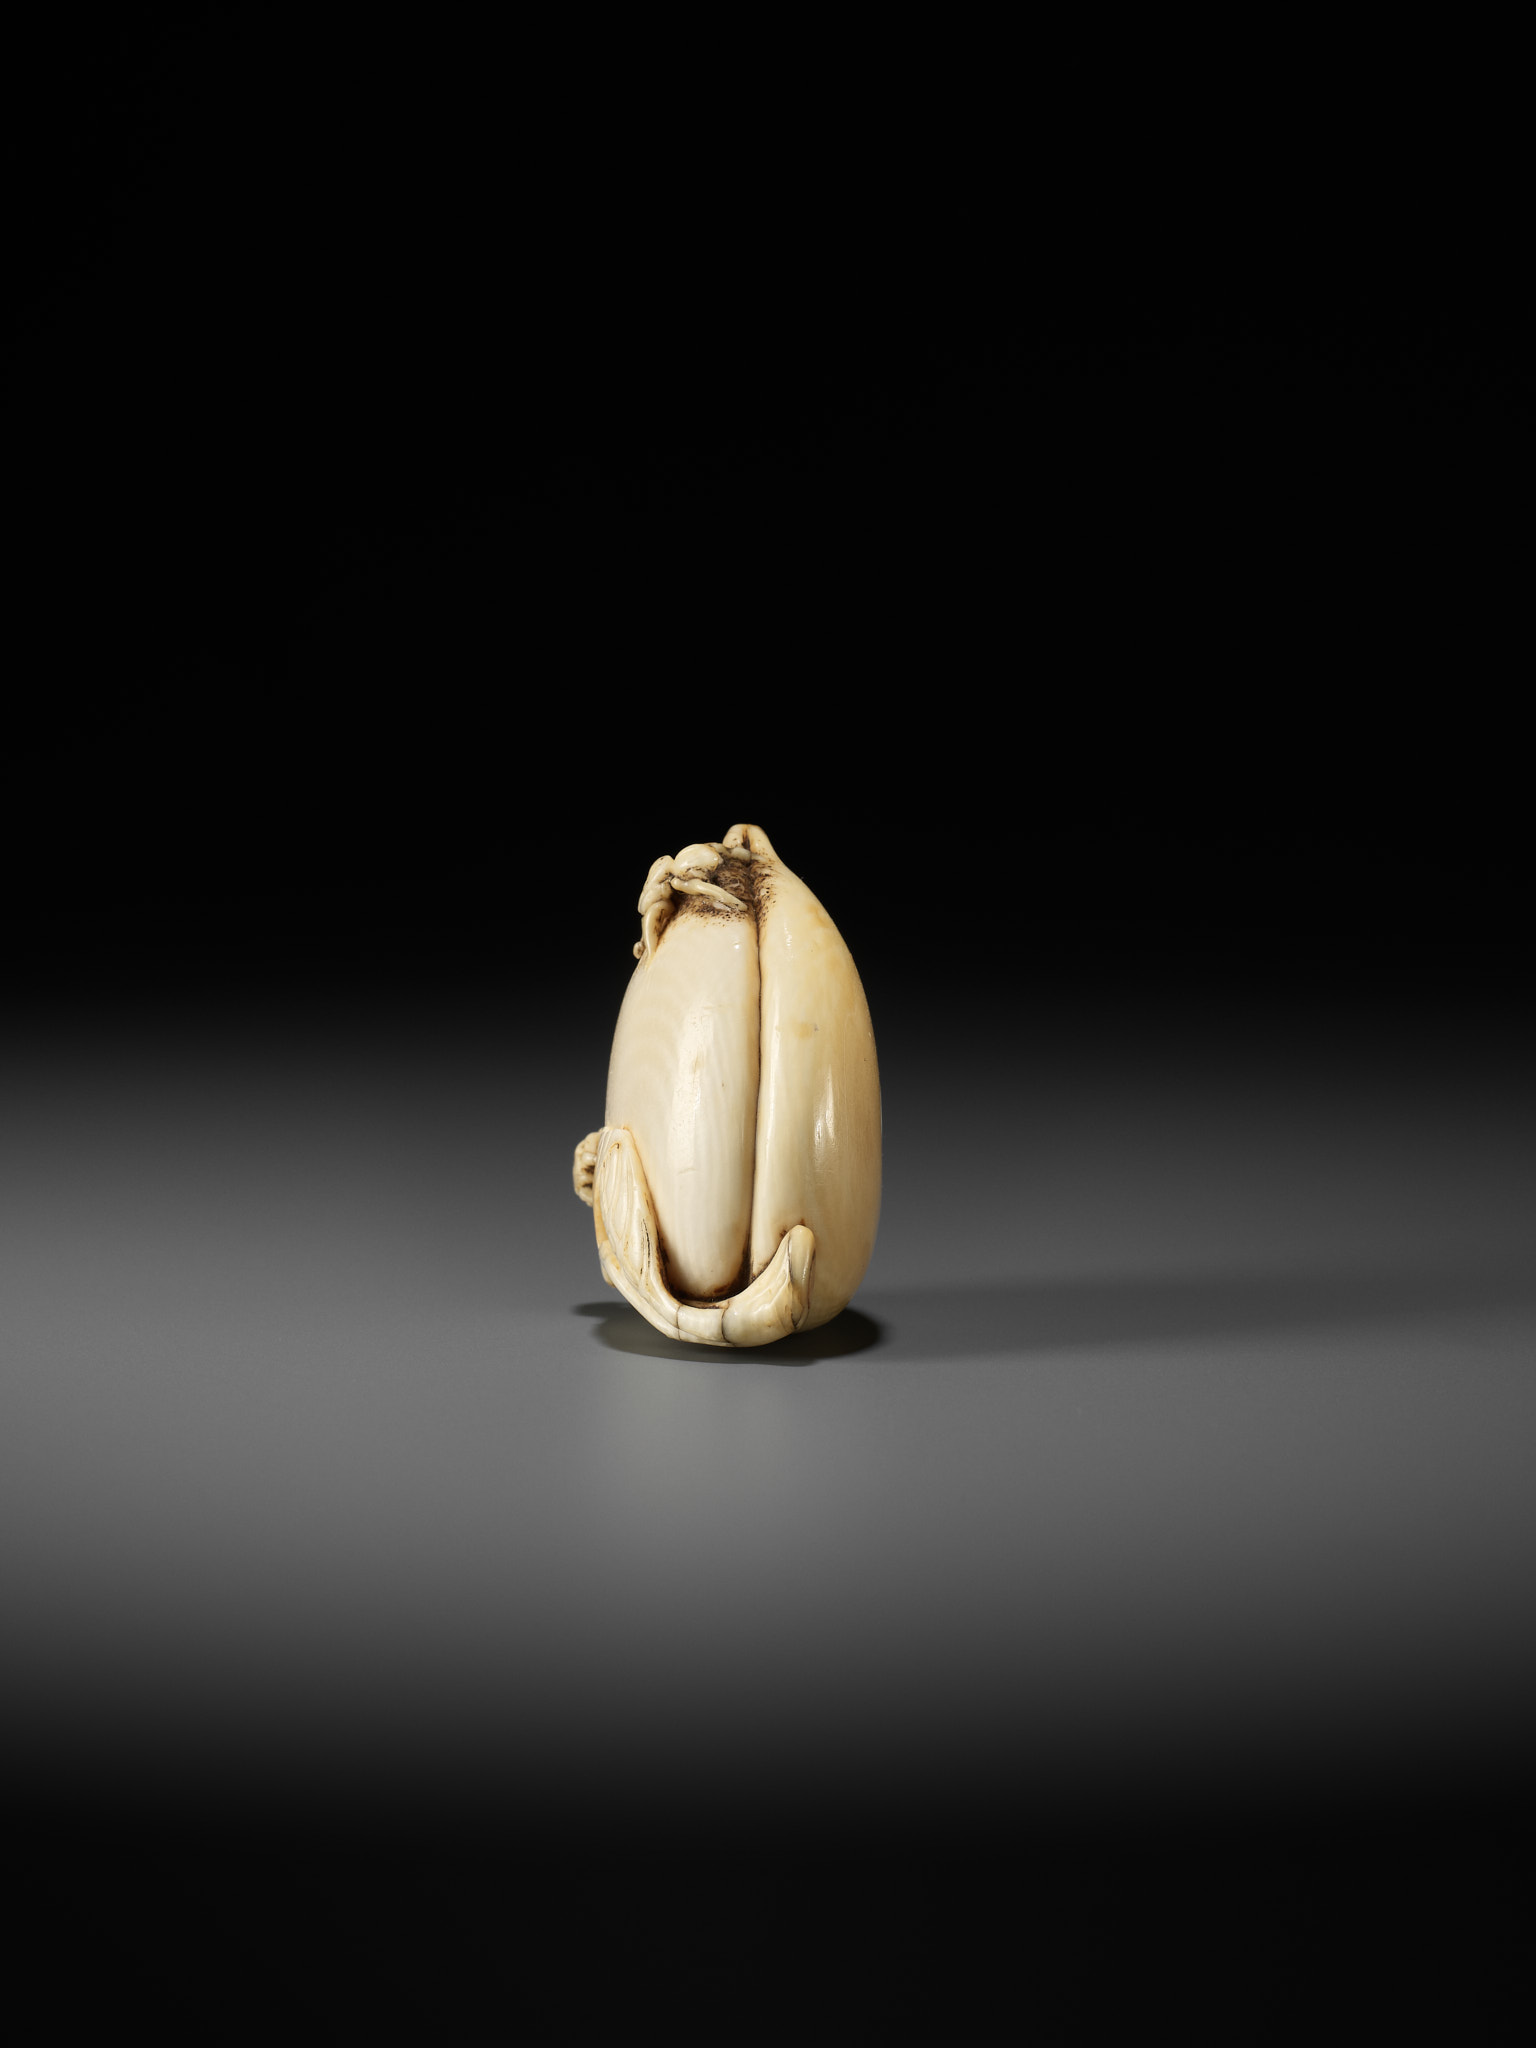 AN IVORY NETSUKE OF A PEACH WITH INSECTS - Image 4 of 10